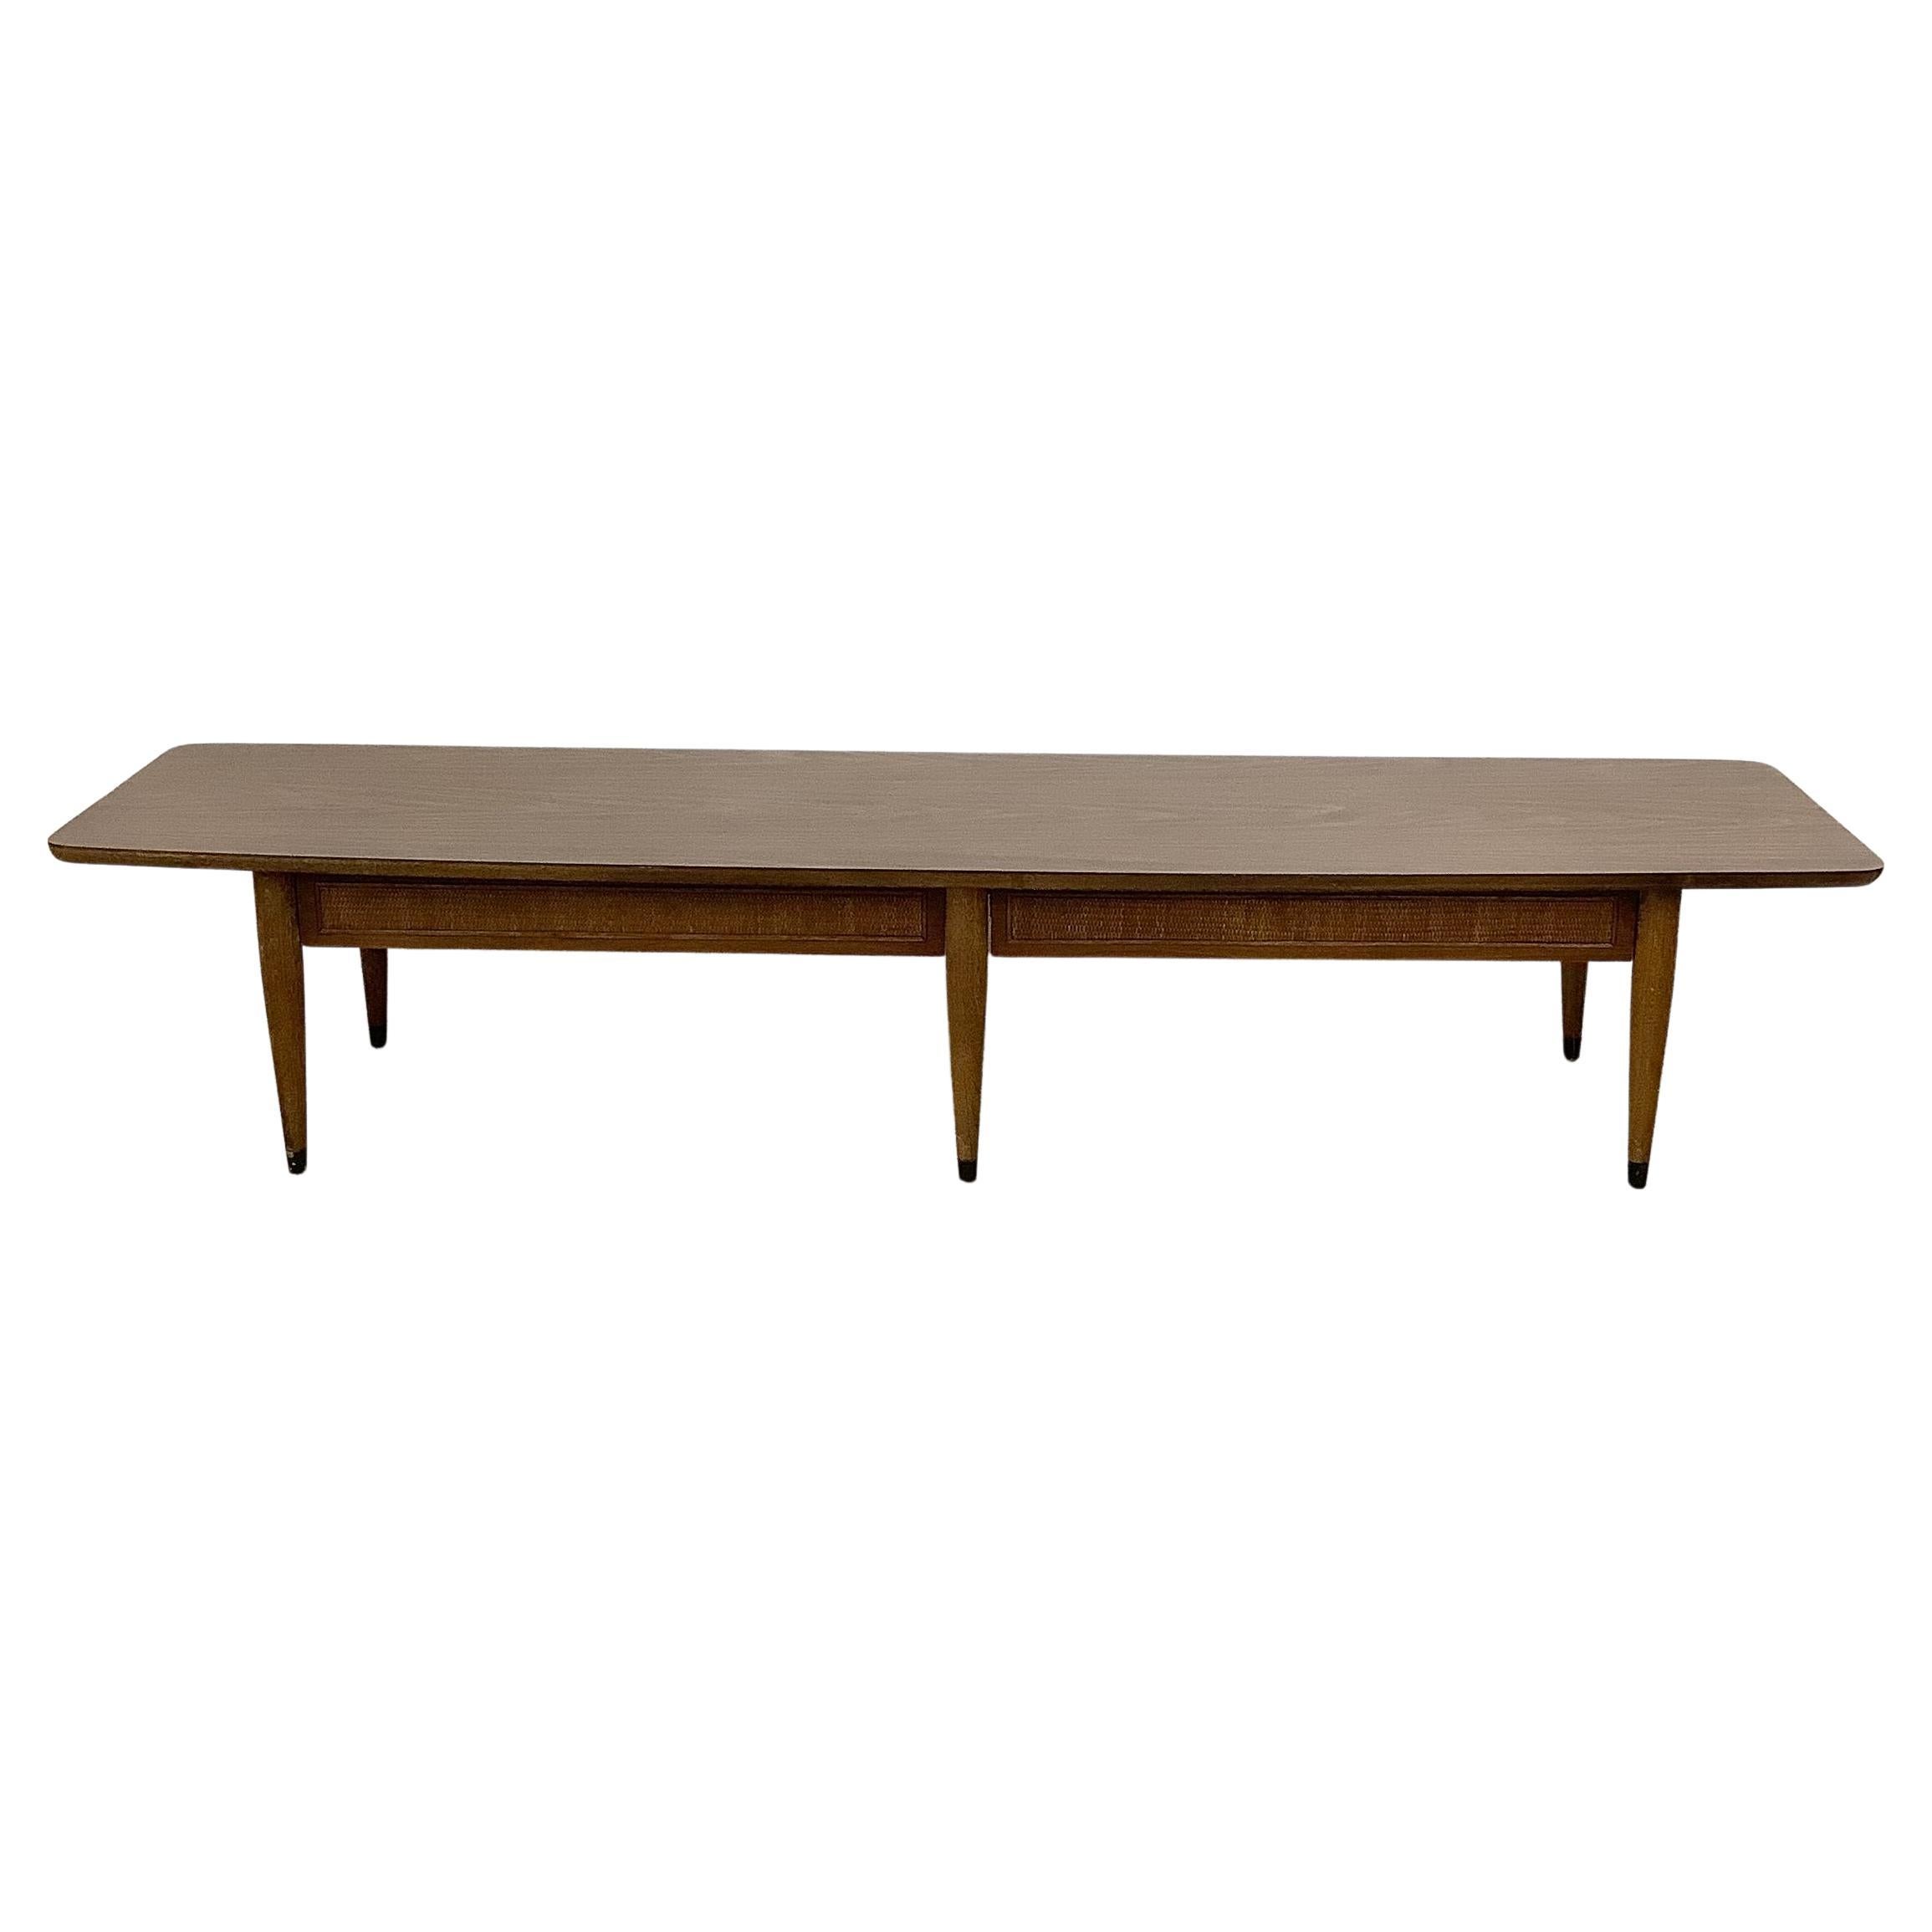 Long Midcentury Coffee Table with Dual Drawer Storage